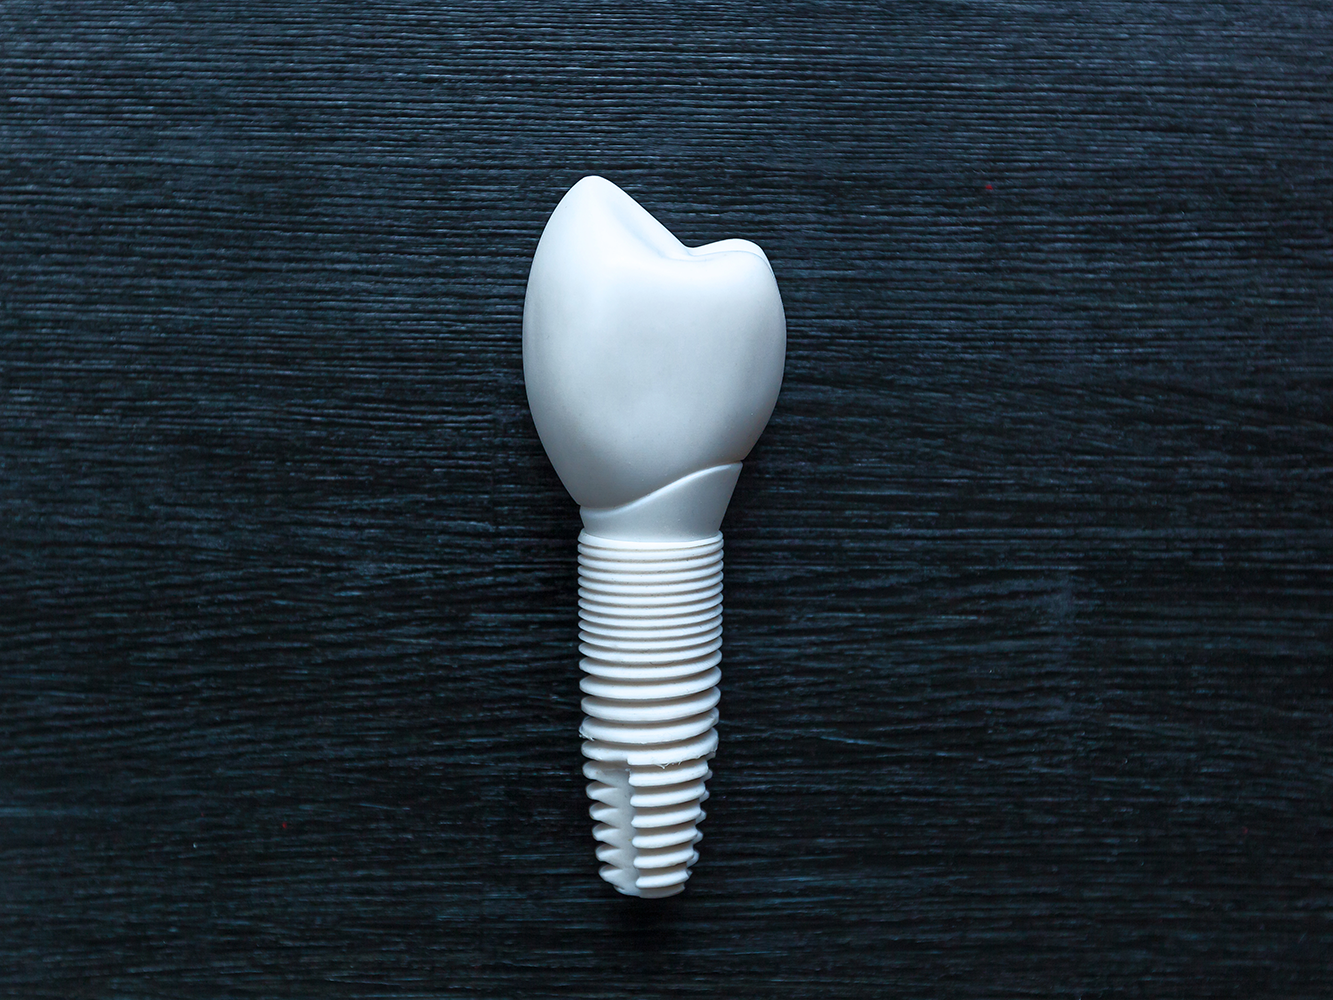 zirconia dental implant example for patients that prefer metal-free solutions